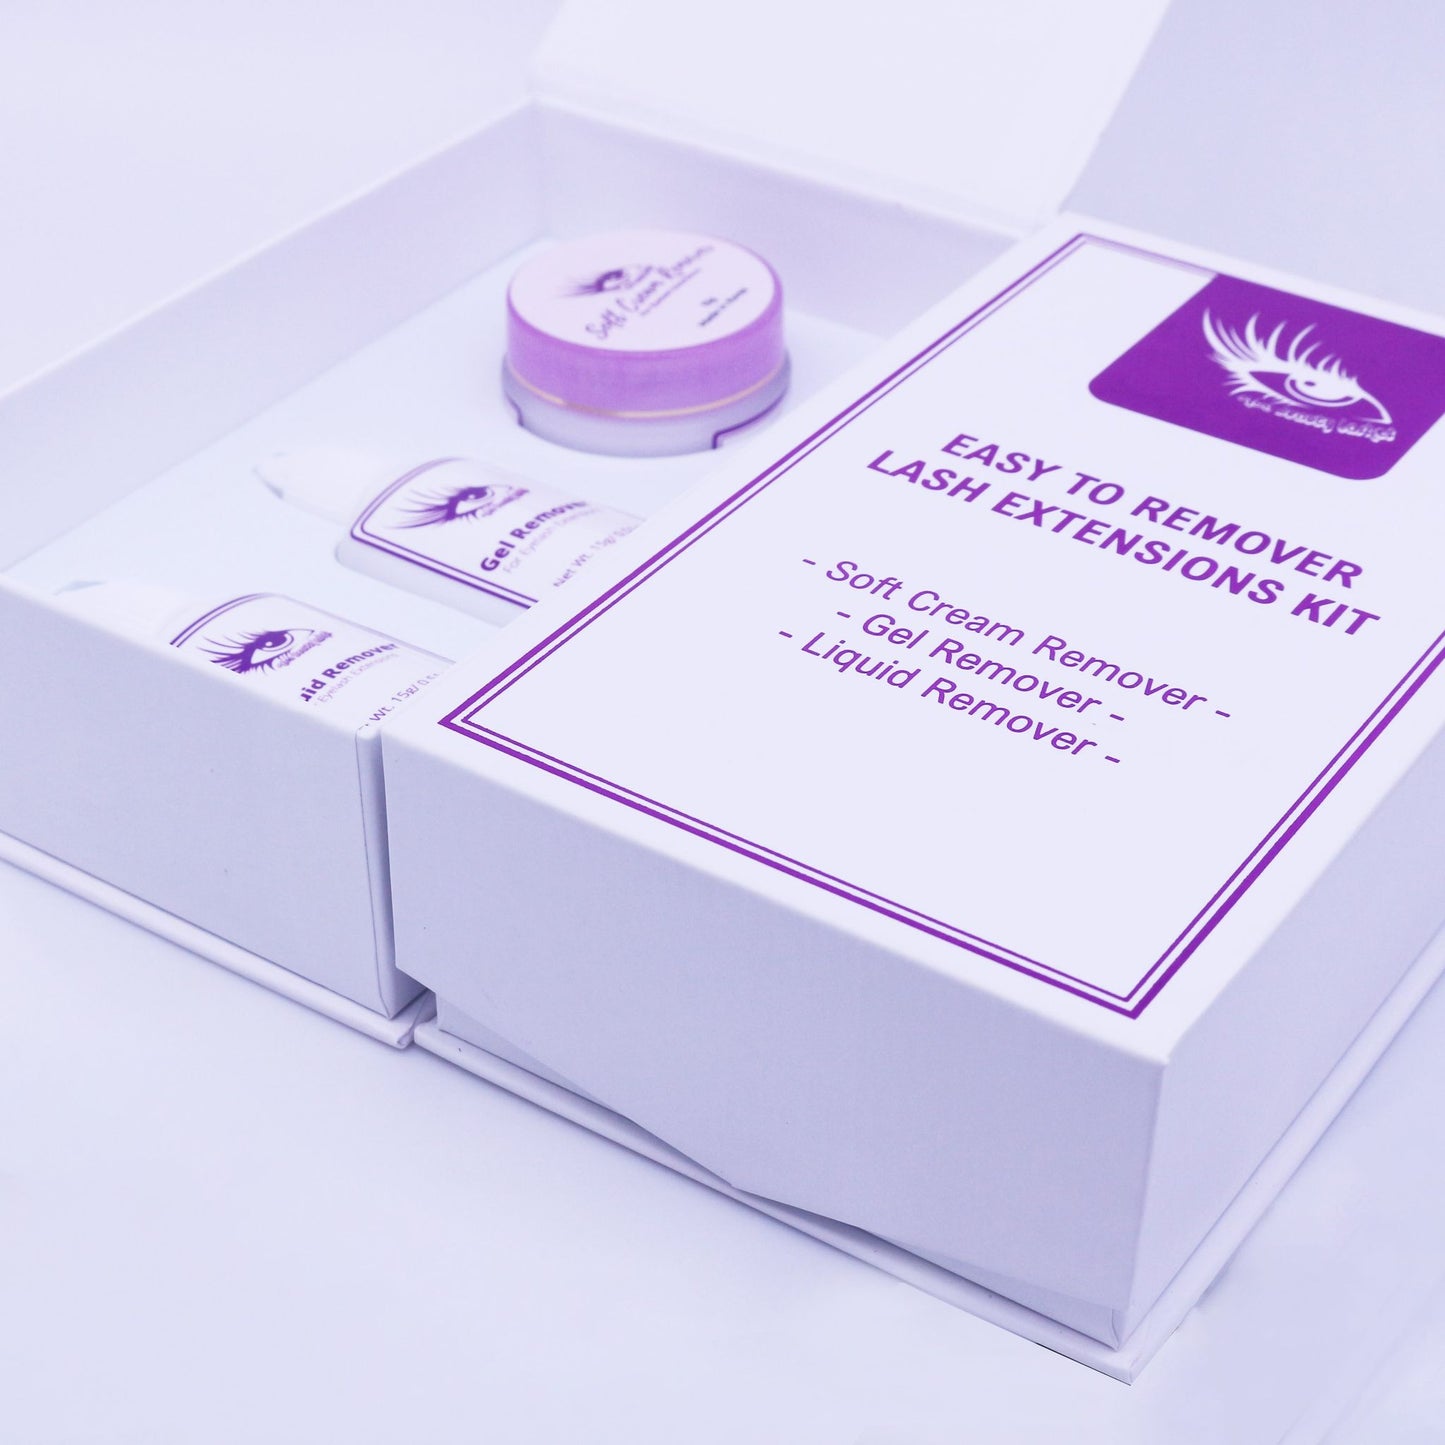 Hoabeautylashes - Remover Kit